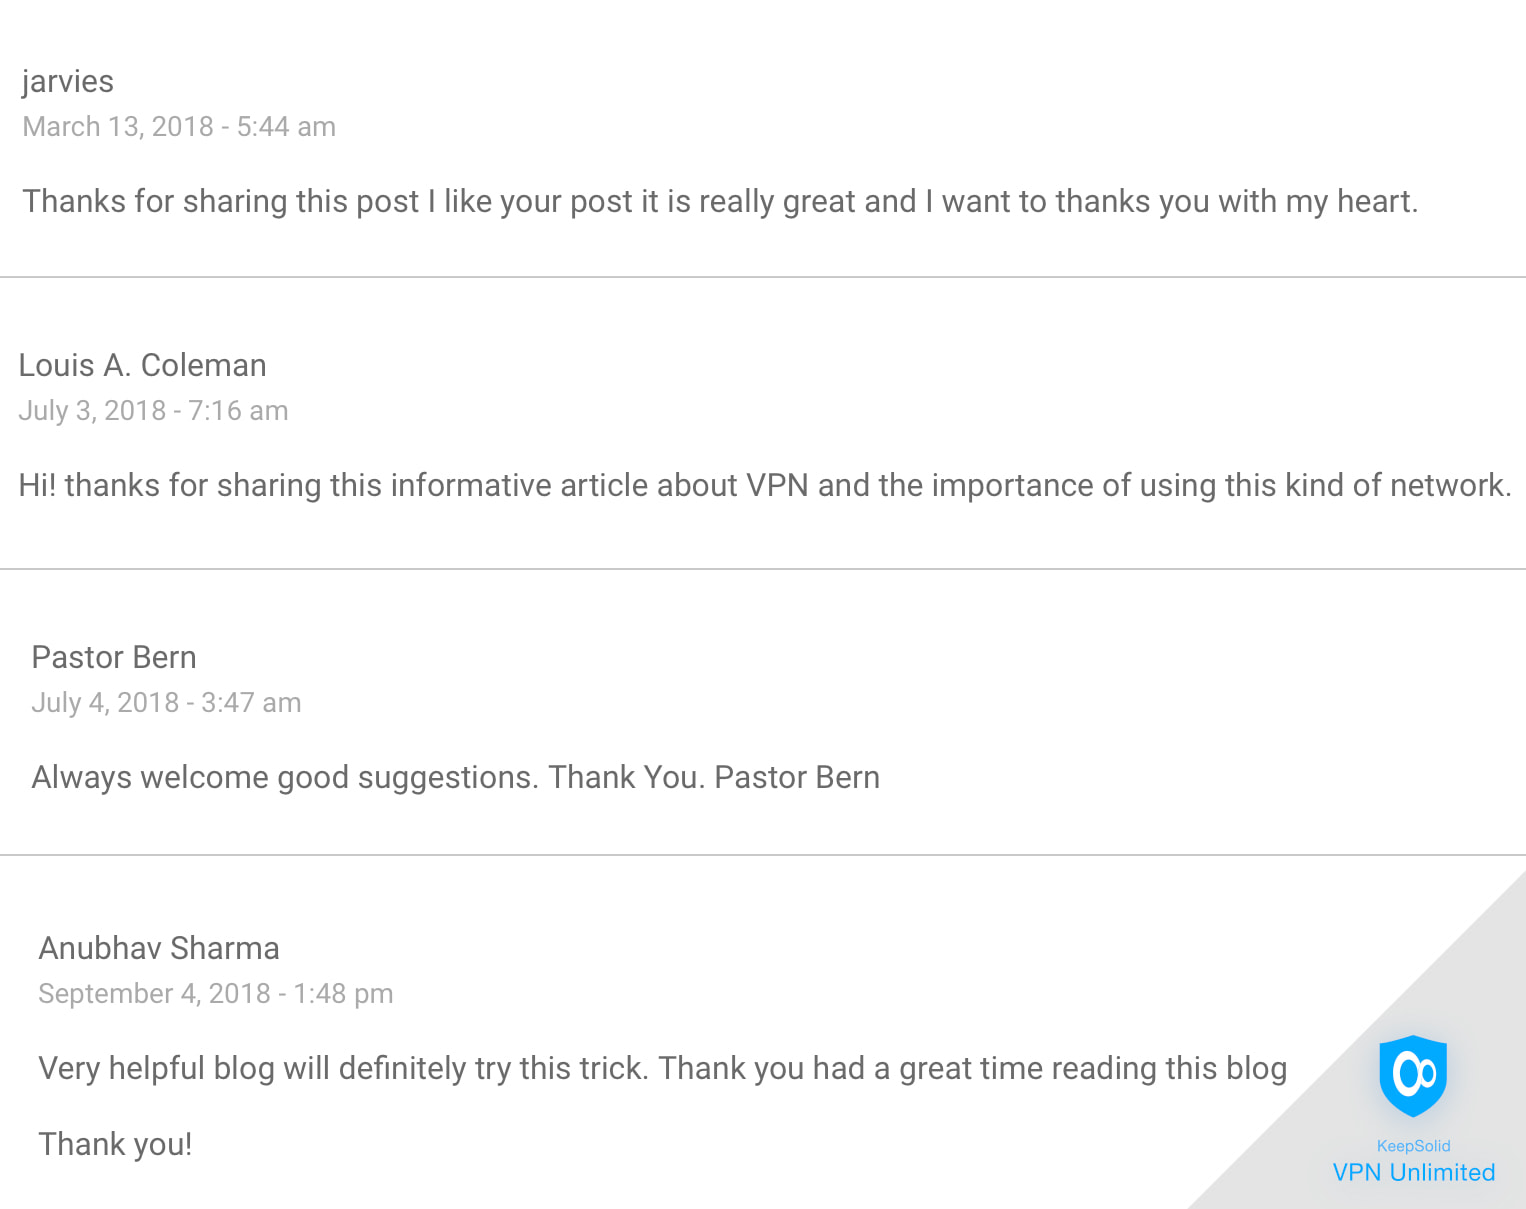 Our readers' top comments about KeepSolid VPN Unlimited blog